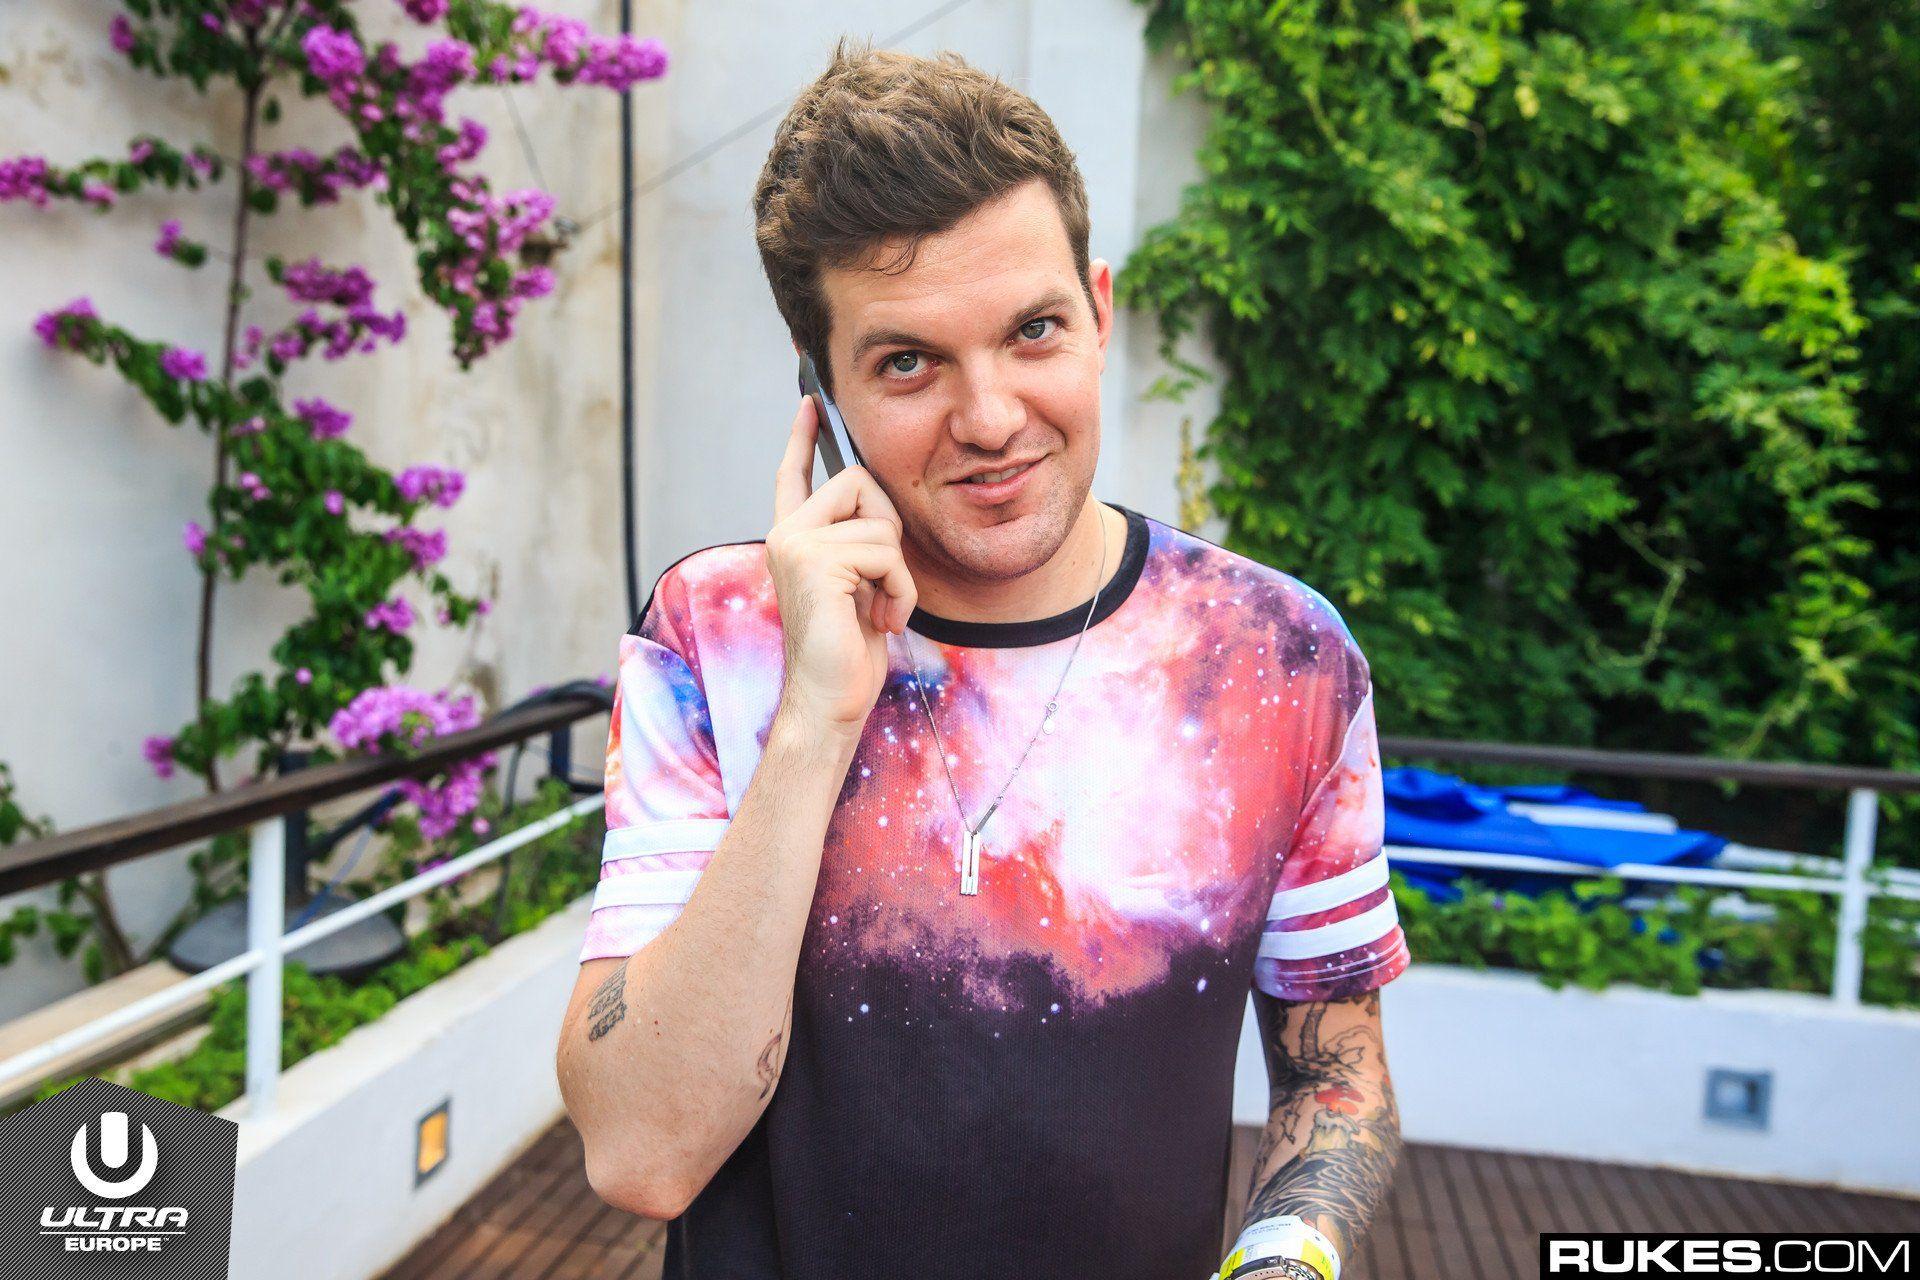 Dillon Francis Confirms He's Finished The Spanish Language Album